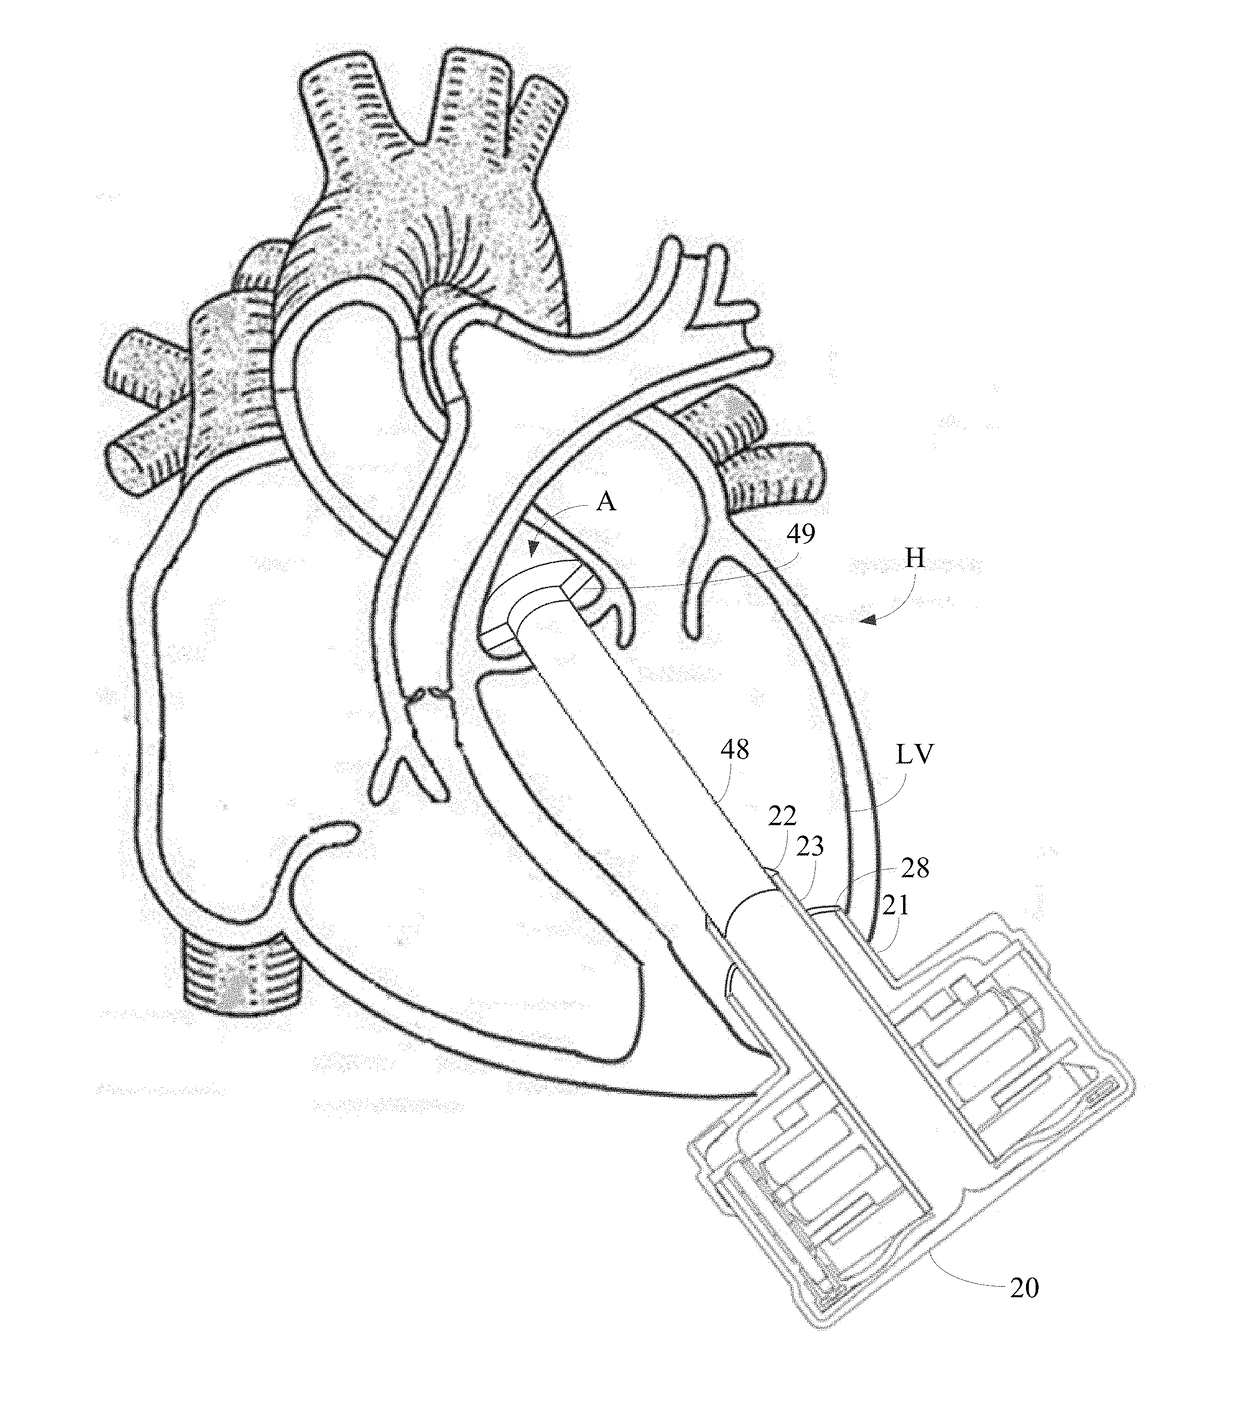 Implantable pump system having a coaxial ventricular cannula